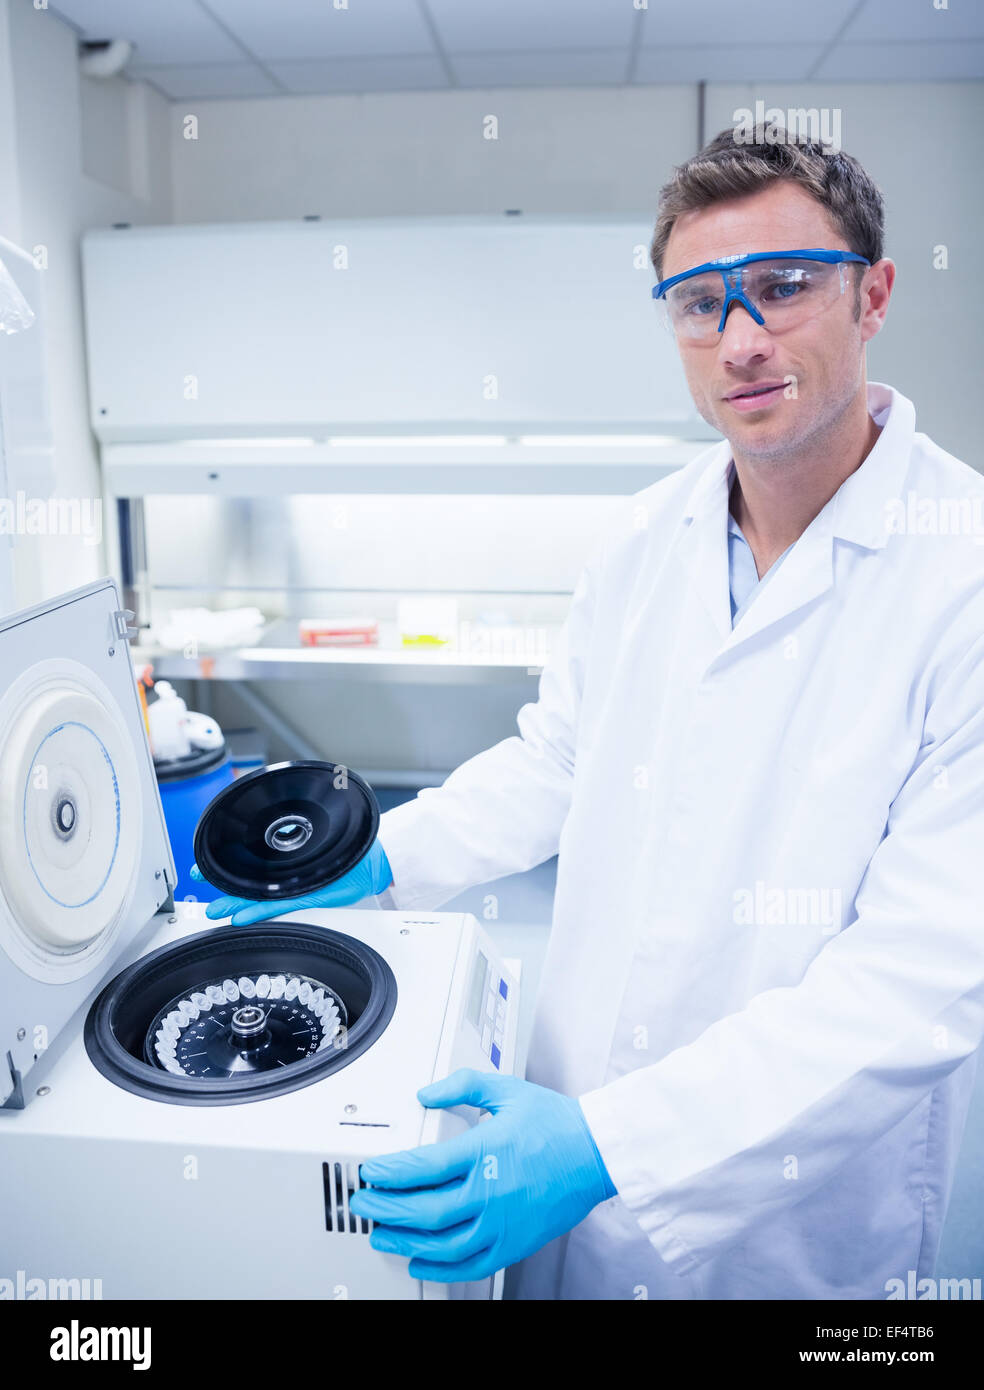 Chemist wearing safety glasses and using a centrifuge Stock Photo